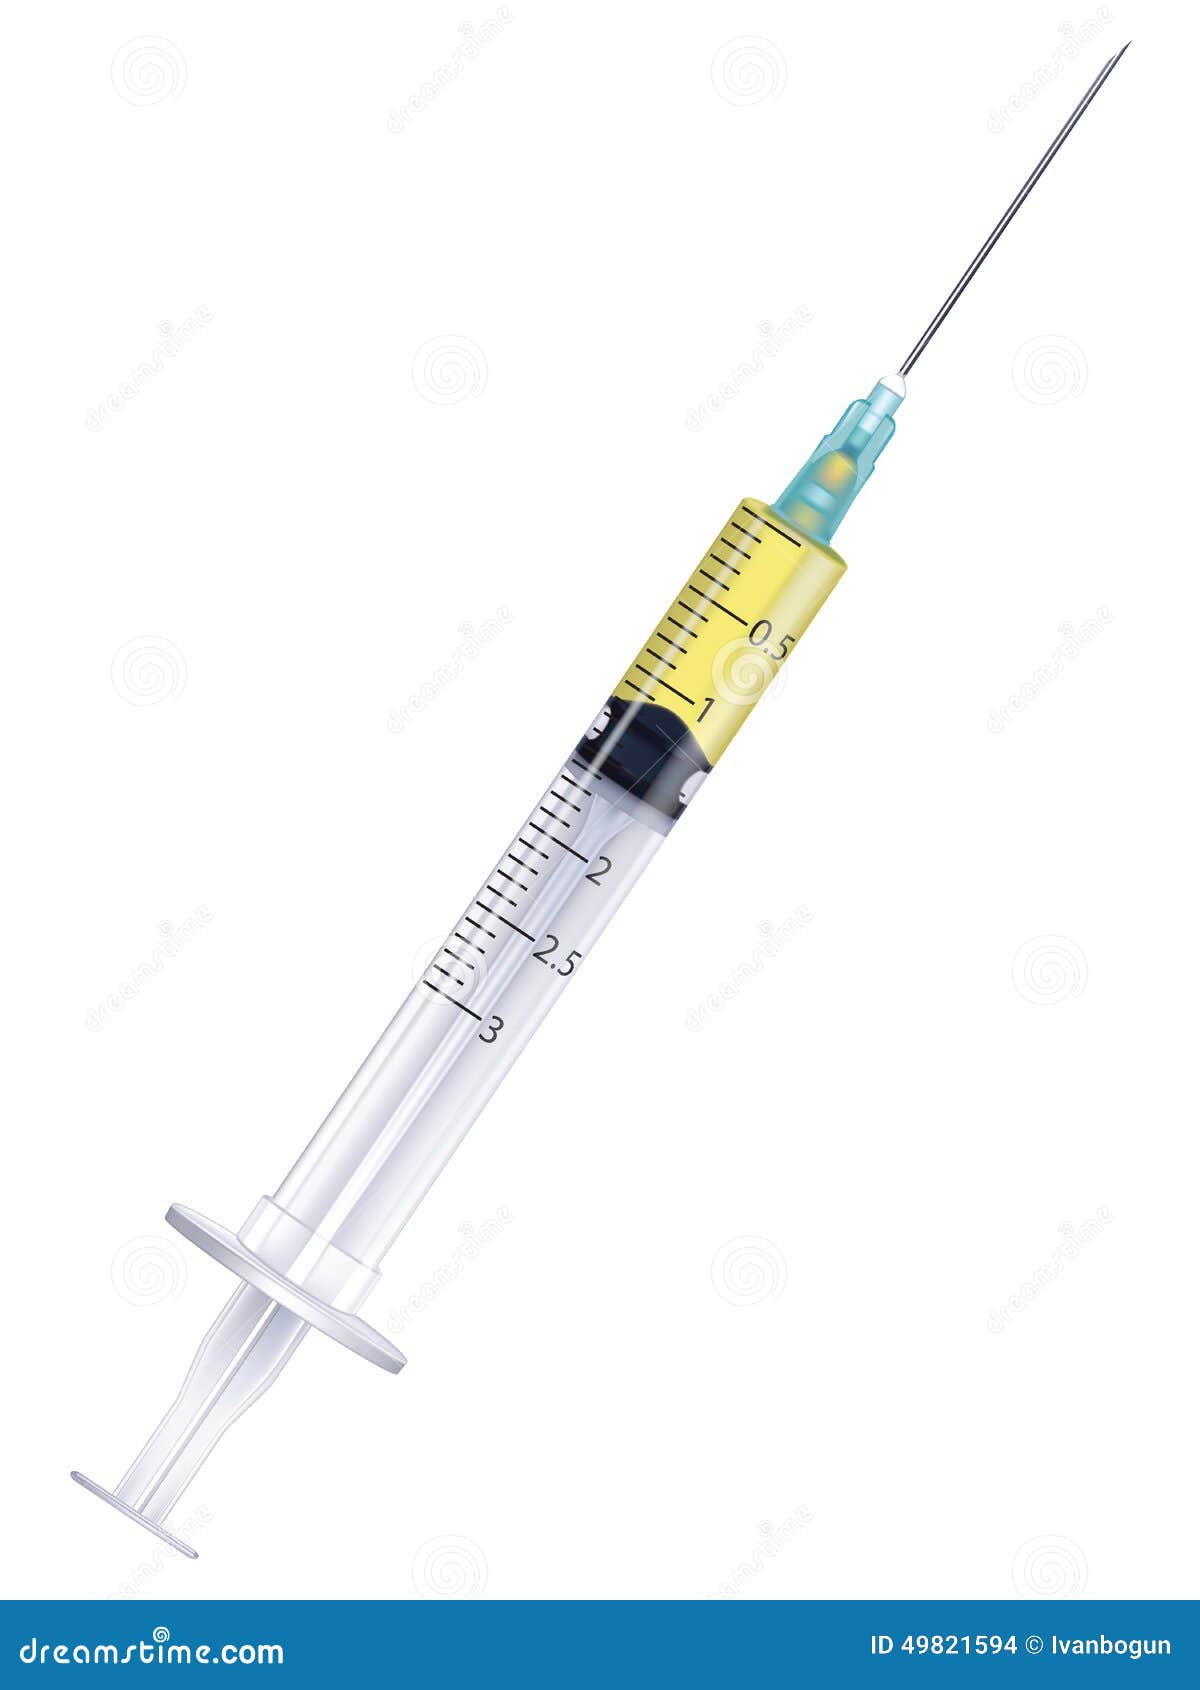 vaccine in a syringe, .